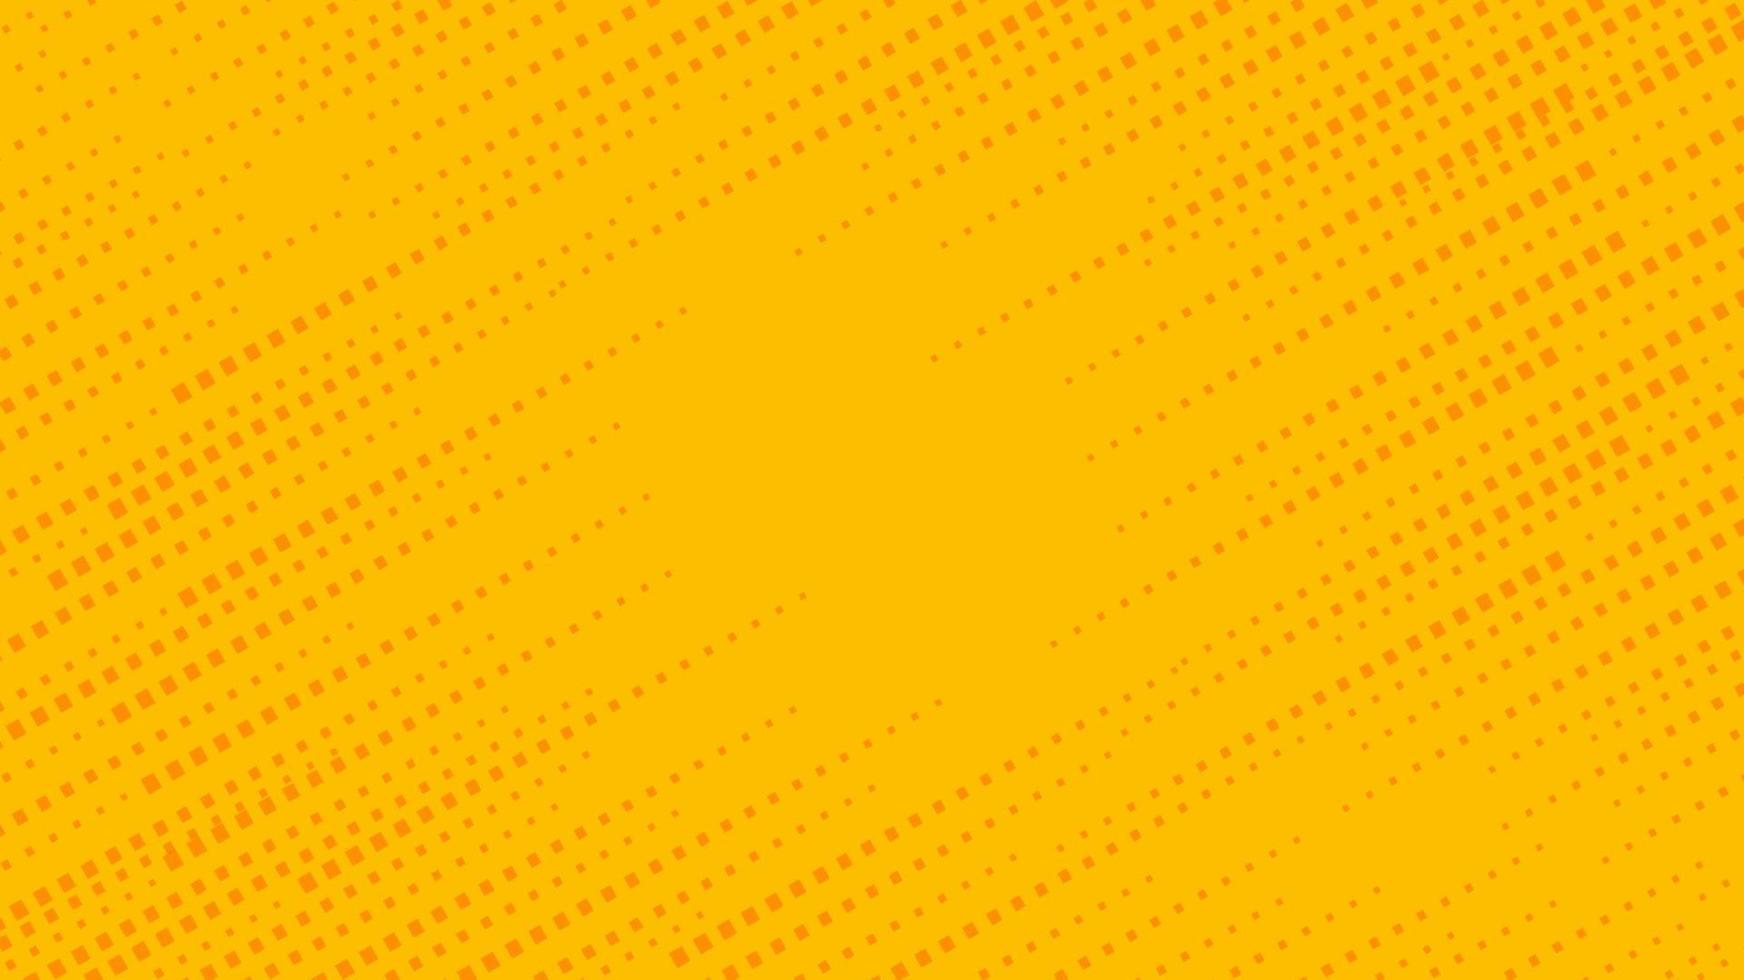 Abstract yellow halftone background concept vector